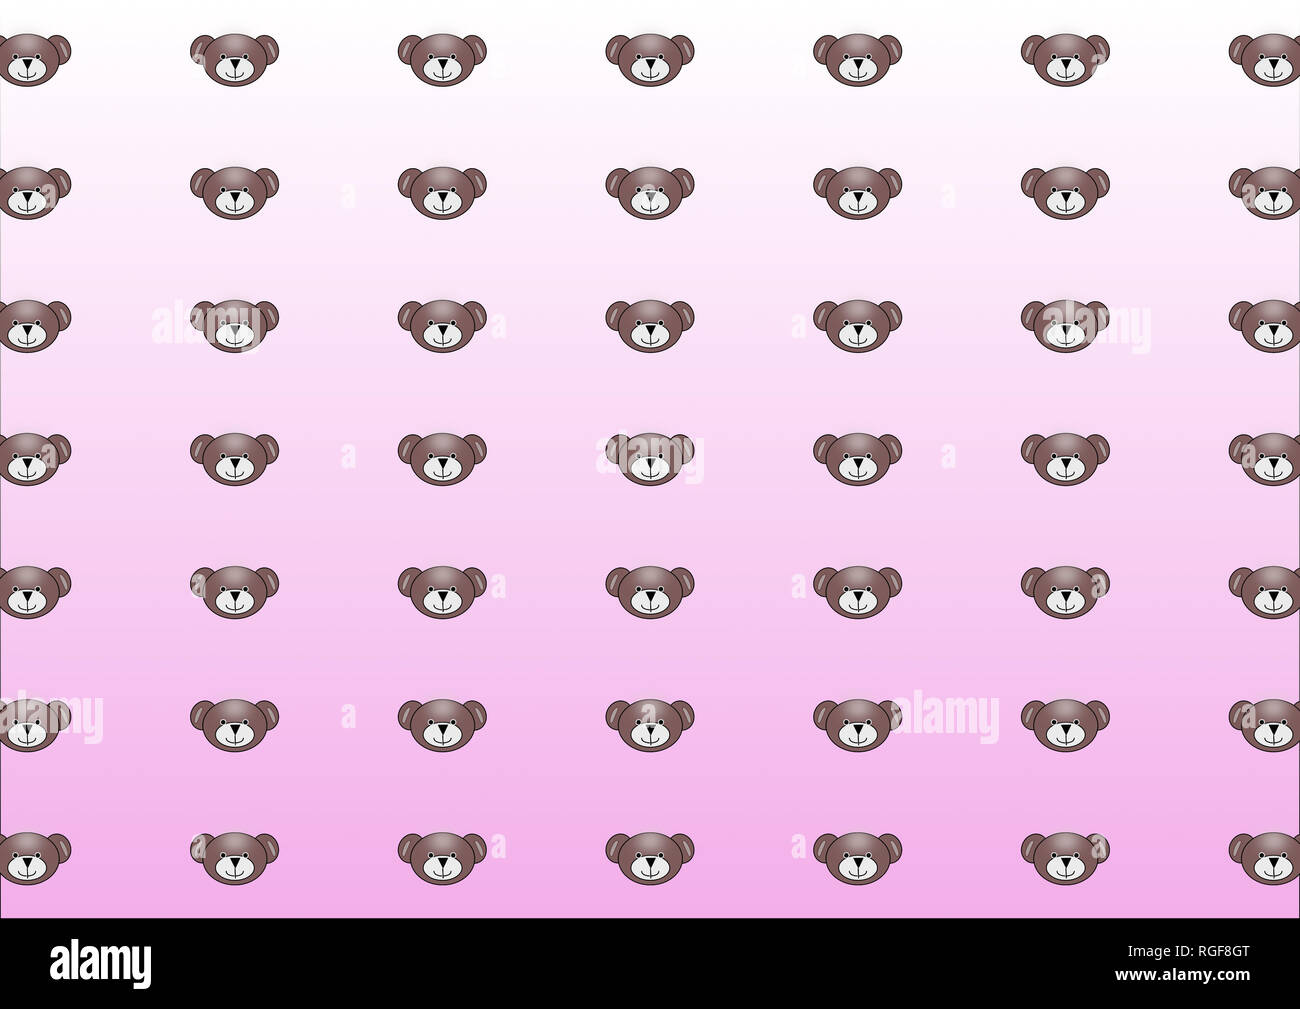 Teddy bear icons on blurred pink background, cartoon style, baby, girl, childlike Stock Photo